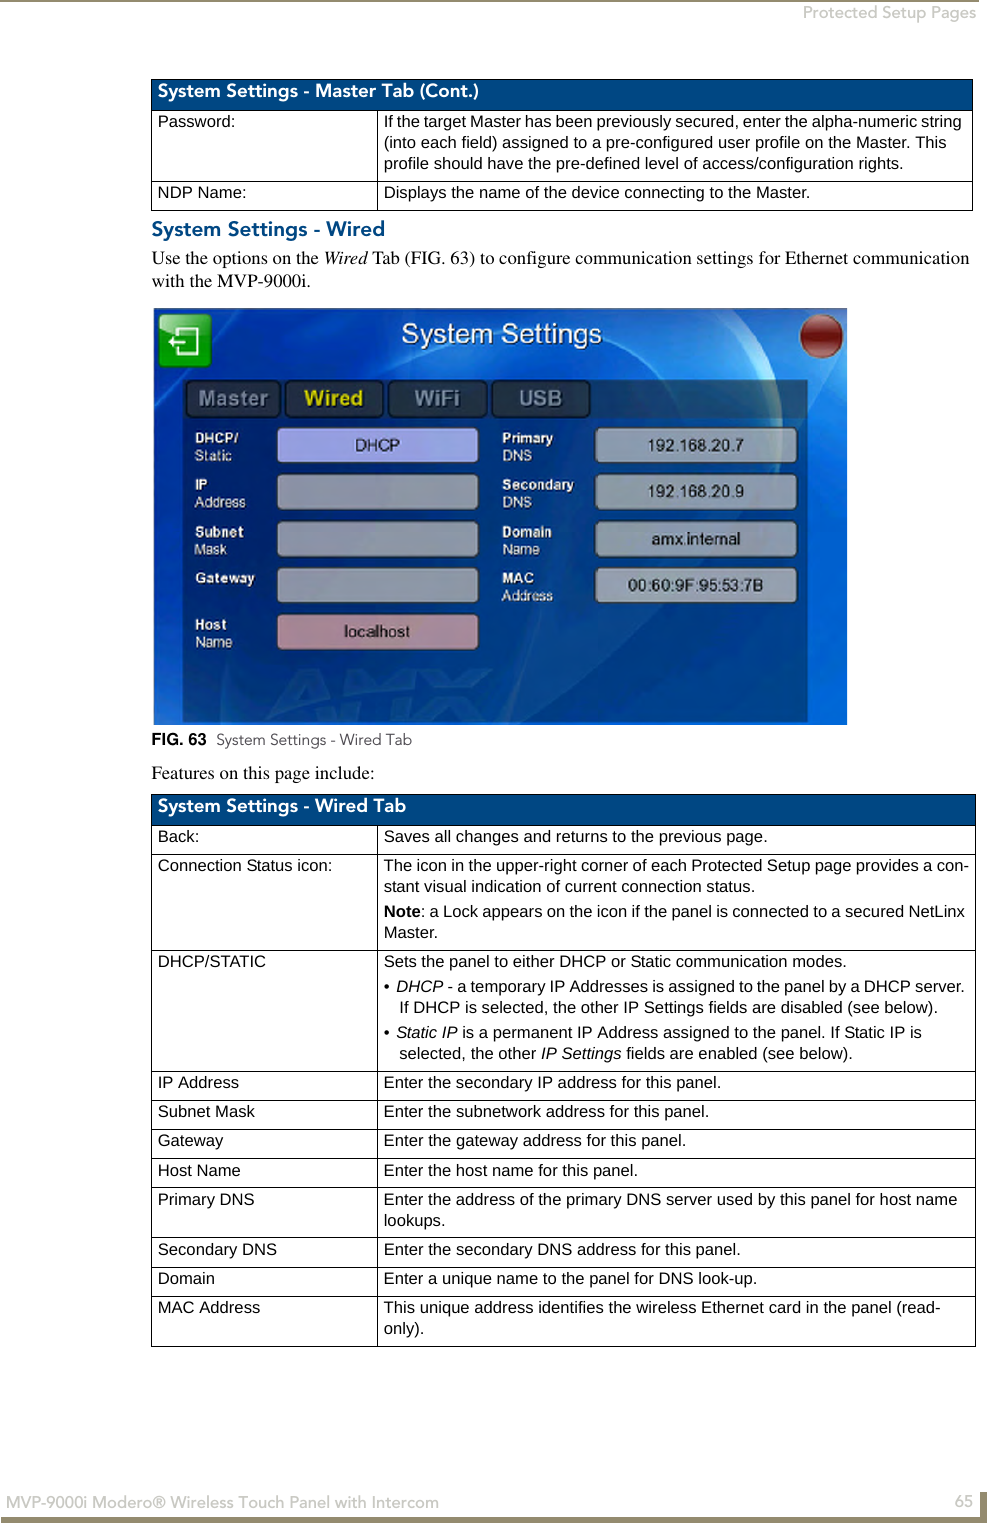 Protected Setup Pages65MVP-9000i Modero® Wireless Touch Panel with IntercomSystem Settings - WiredUse the options on the Wired Tab (FIG. 63) to configure communication settings for Ethernet communication with the MVP-9000i. Features on this page include:  System Settings - Master Tab (Cont.)Password: If the target Master has been previously secured, enter the alpha-numeric string (into each field) assigned to a pre-configured user profile on the Master. This profile should have the pre-defined level of access/configuration rights.NDP Name: Displays the name of the device connecting to the Master.FIG. 63  System Settings - Wired TabSystem Settings - Wired TabBack: Saves all changes and returns to the previous page.Connection Status icon: The icon in the upper-right corner of each Protected Setup page provides a con-stant visual indication of current connection status.Note: a Lock appears on the icon if the panel is connected to a secured NetLinx Master.DHCP/STATIC Sets the panel to either DHCP or Static communication modes. •DHCP - a temporary IP Addresses is assigned to the panel by a DHCP server. If DHCP is selected, the other IP Settings fields are disabled (see below).•Static IP is a permanent IP Address assigned to the panel. If Static IP is selected, the other IP Settings fields are enabled (see below).IP Address Enter the secondary IP address for this panel.Subnet Mask Enter the subnetwork address for this panel.Gateway Enter the gateway address for this panel.Host Name Enter the host name for this panel.Primary DNS Enter the address of the primary DNS server used by this panel for host name lookups.Secondary DNS Enter the secondary DNS address for this panel.Domain Enter a unique name to the panel for DNS look-up.MAC Address This unique address identifies the wireless Ethernet card in the panel (read-only). 